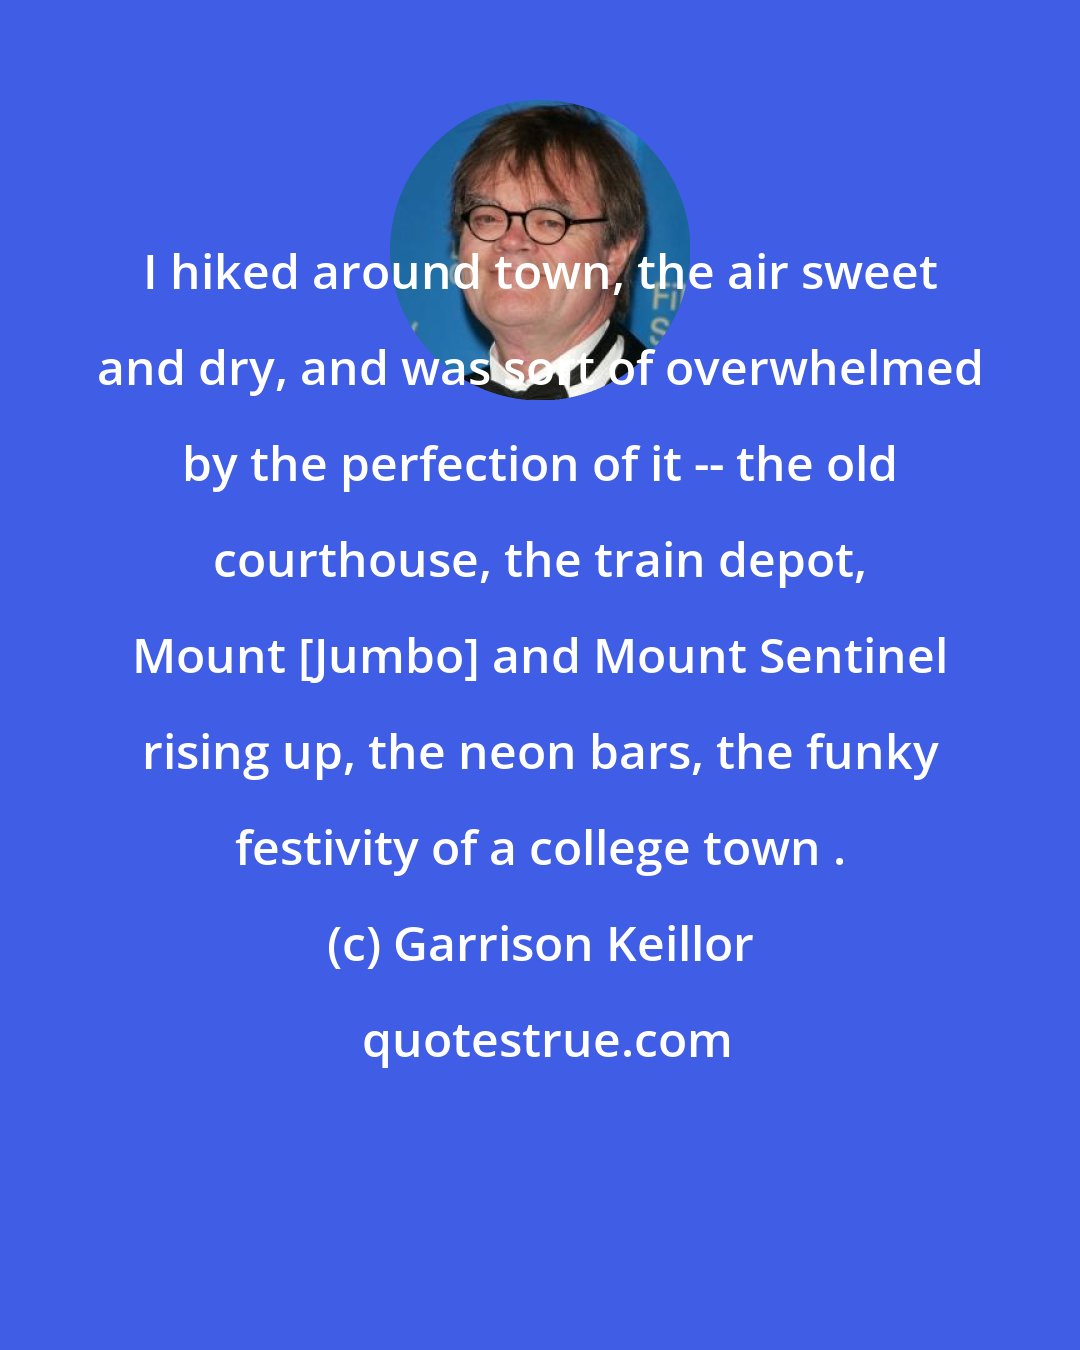 Garrison Keillor: I hiked around town, the air sweet and dry, and was sort of overwhelmed by the perfection of it -- the old courthouse, the train depot, Mount [Jumbo] and Mount Sentinel rising up, the neon bars, the funky festivity of a college town .